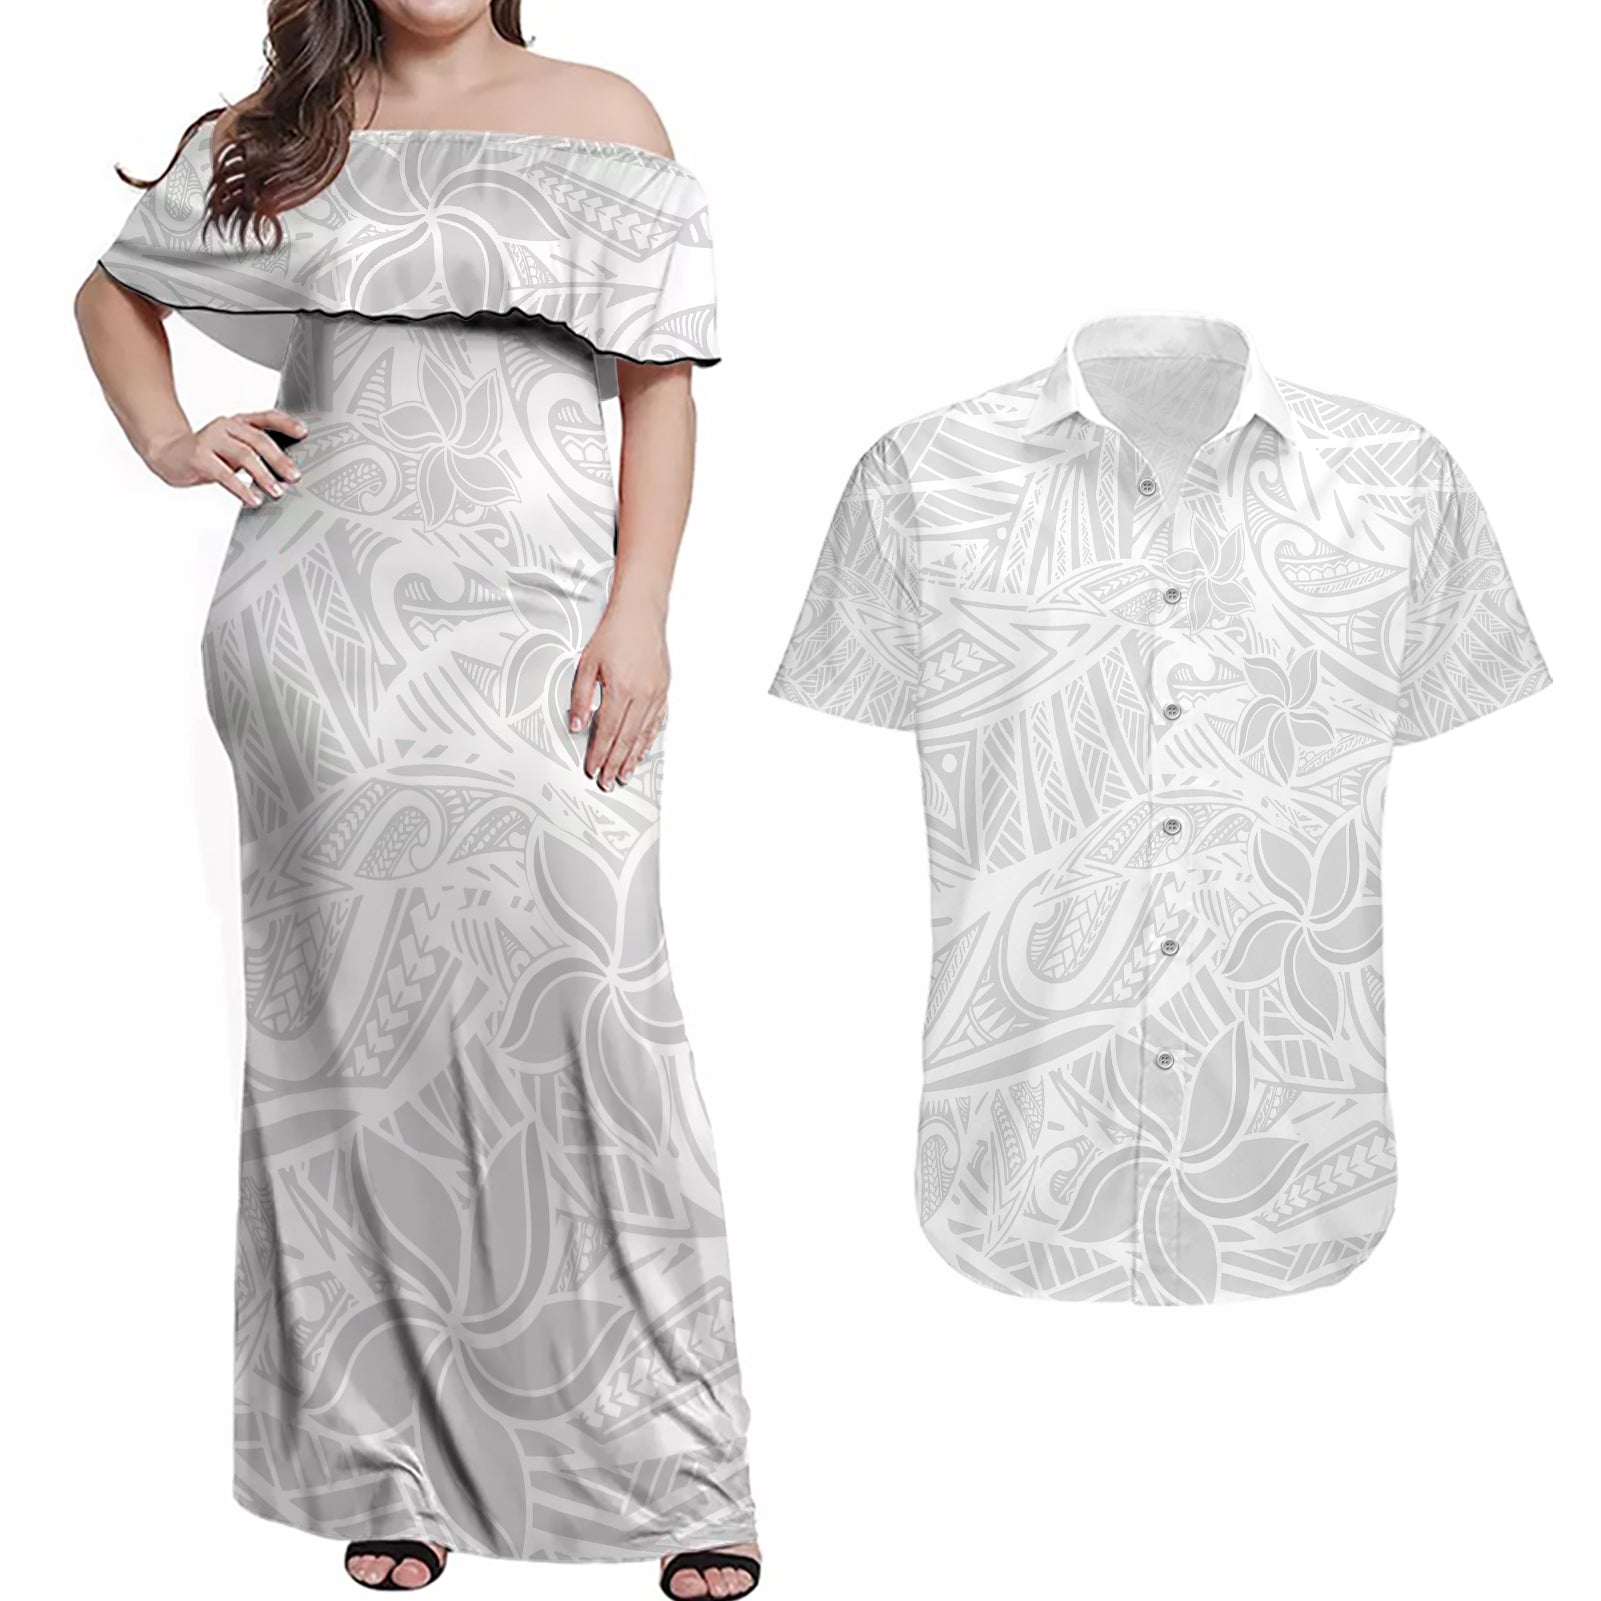 Polynesia White Sunday Couples Matching Off Shoulder Maxi Dress and Hawaiian Shirt Polynesian Pattern With Tropical Flowers LT14 White - Polynesian Pride